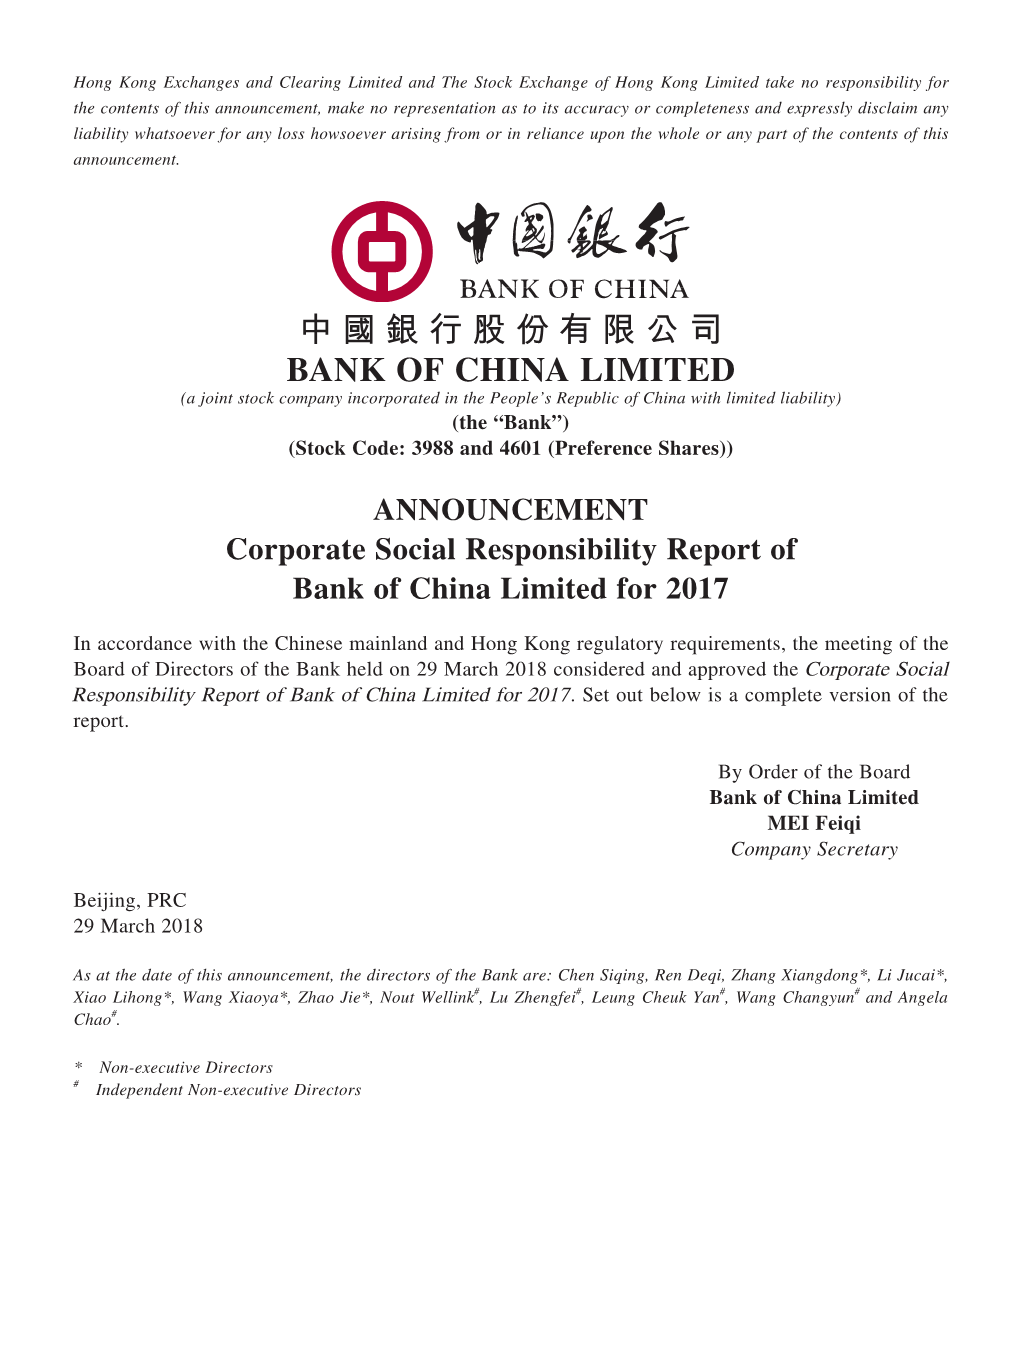 Announcement-Corporate Social Responsibility Report of Bank Of